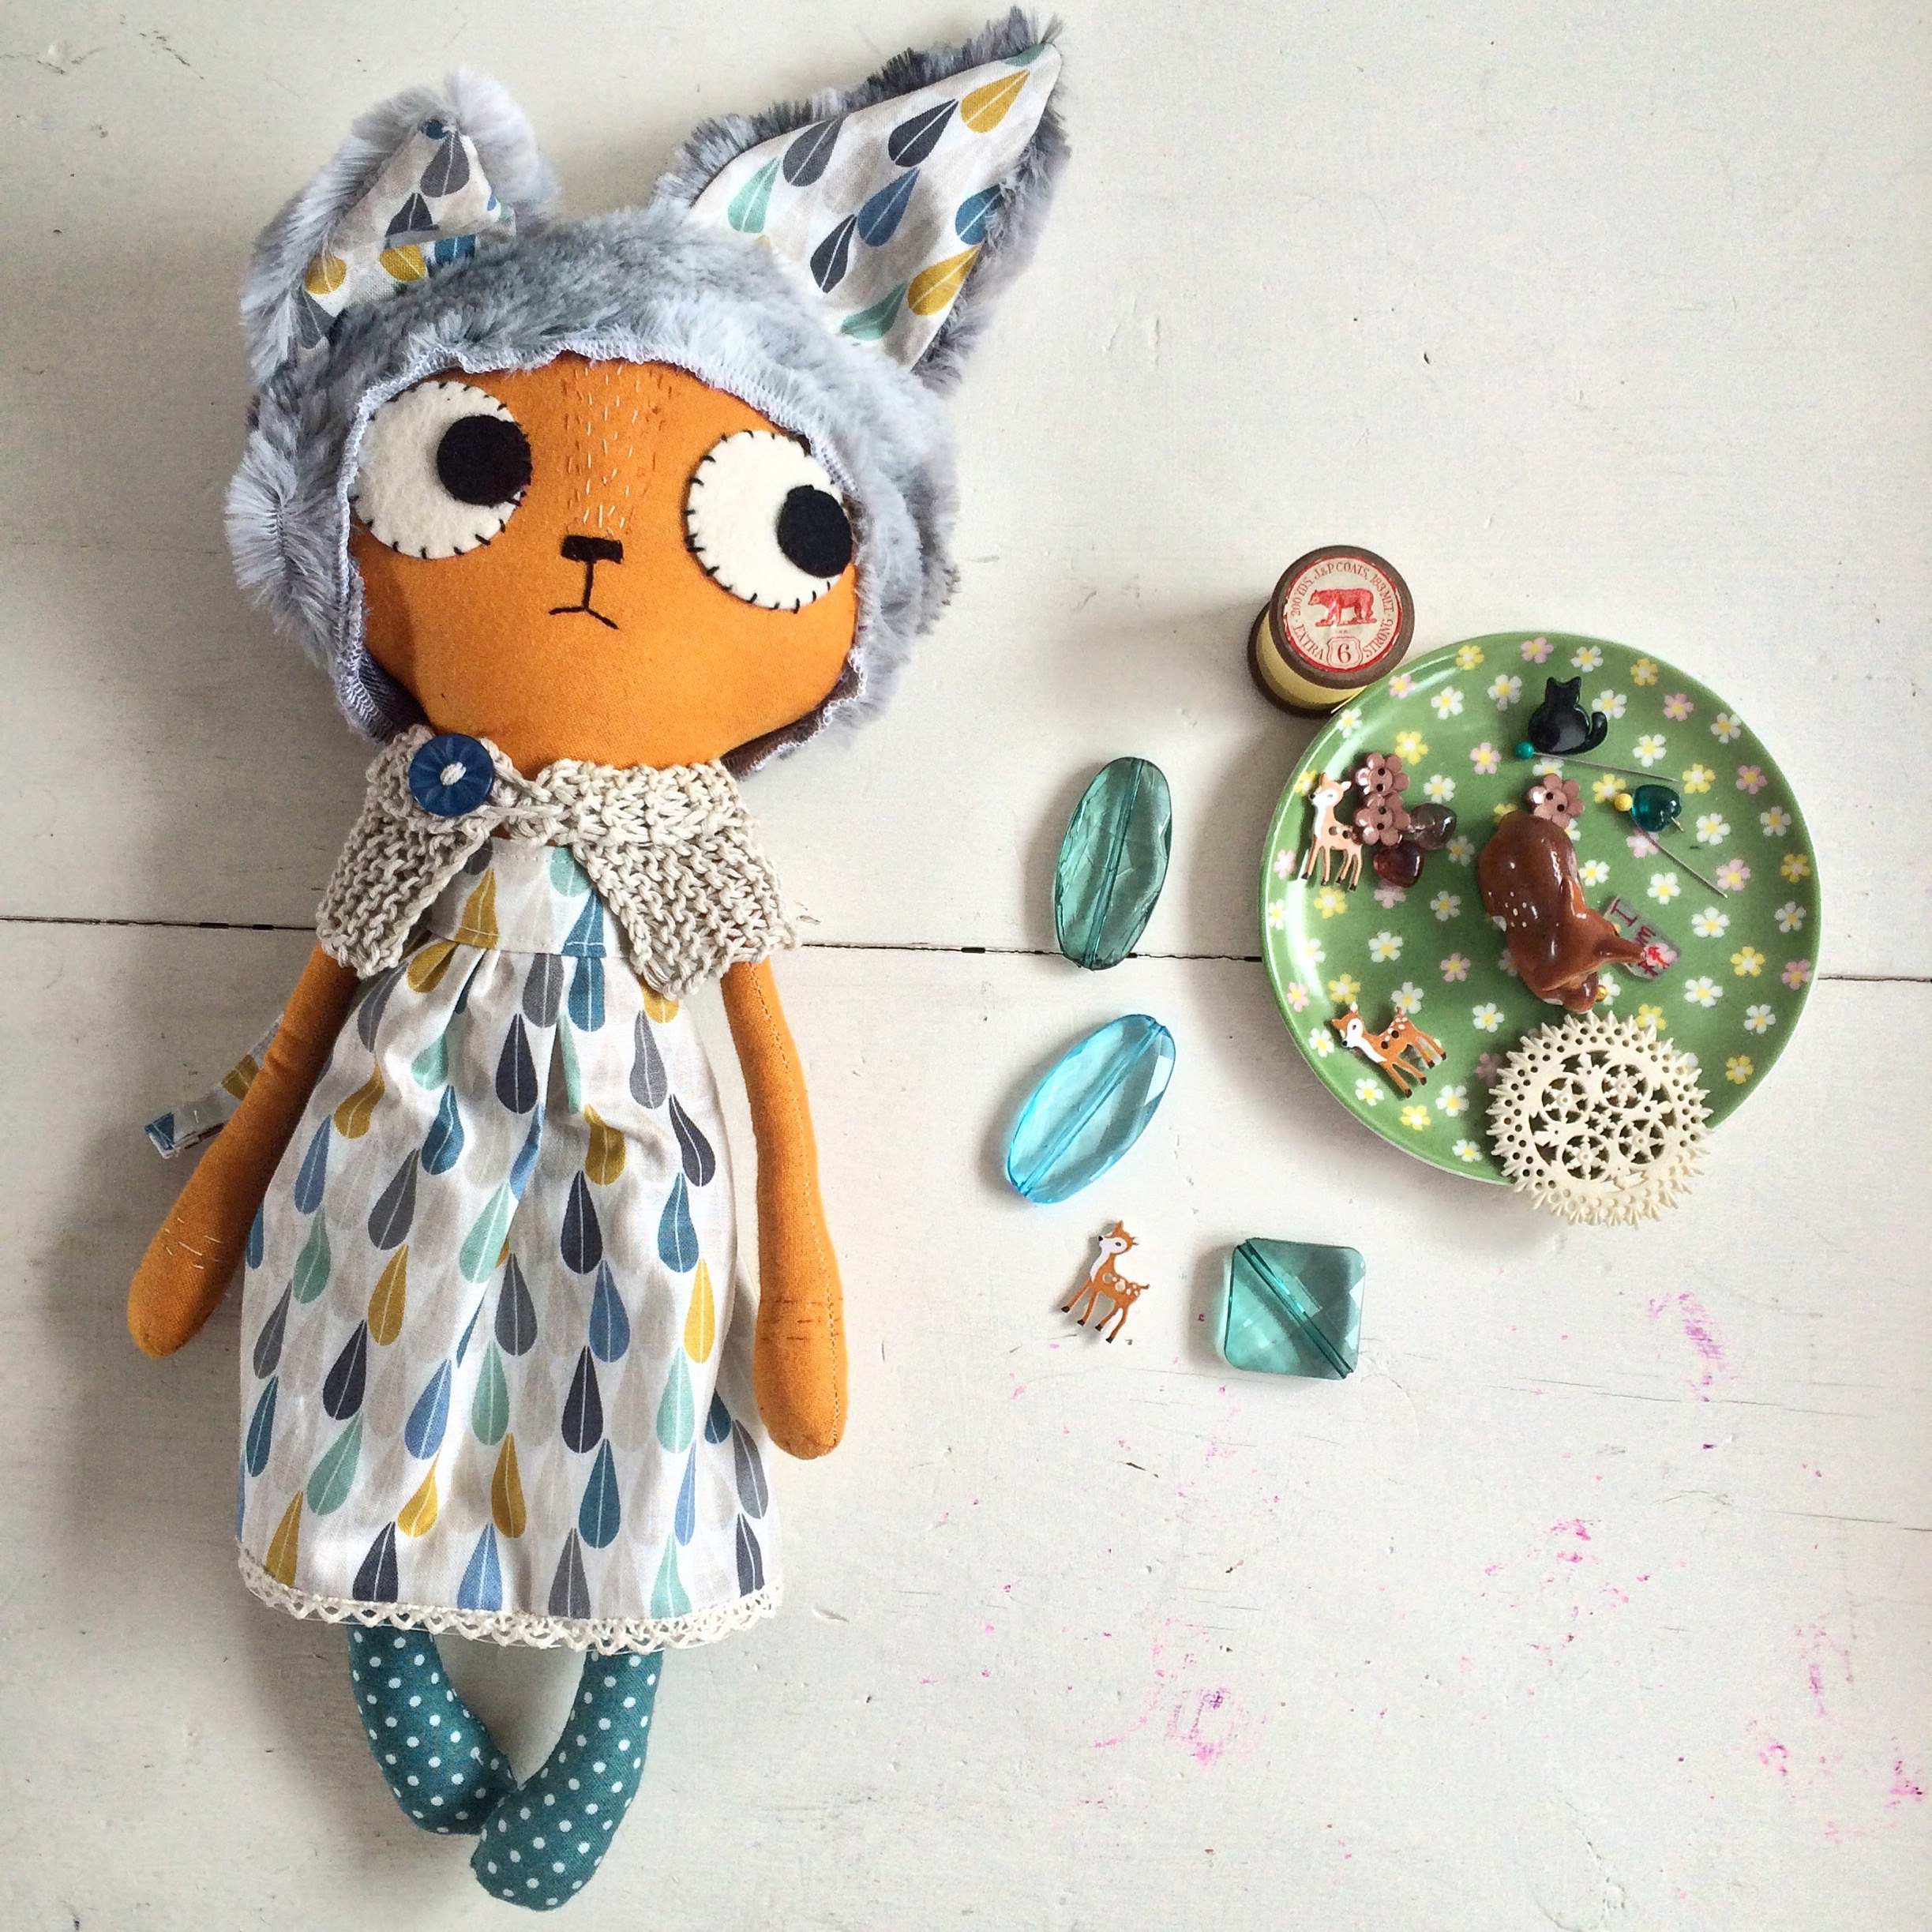 cat doll next to saucer of pins